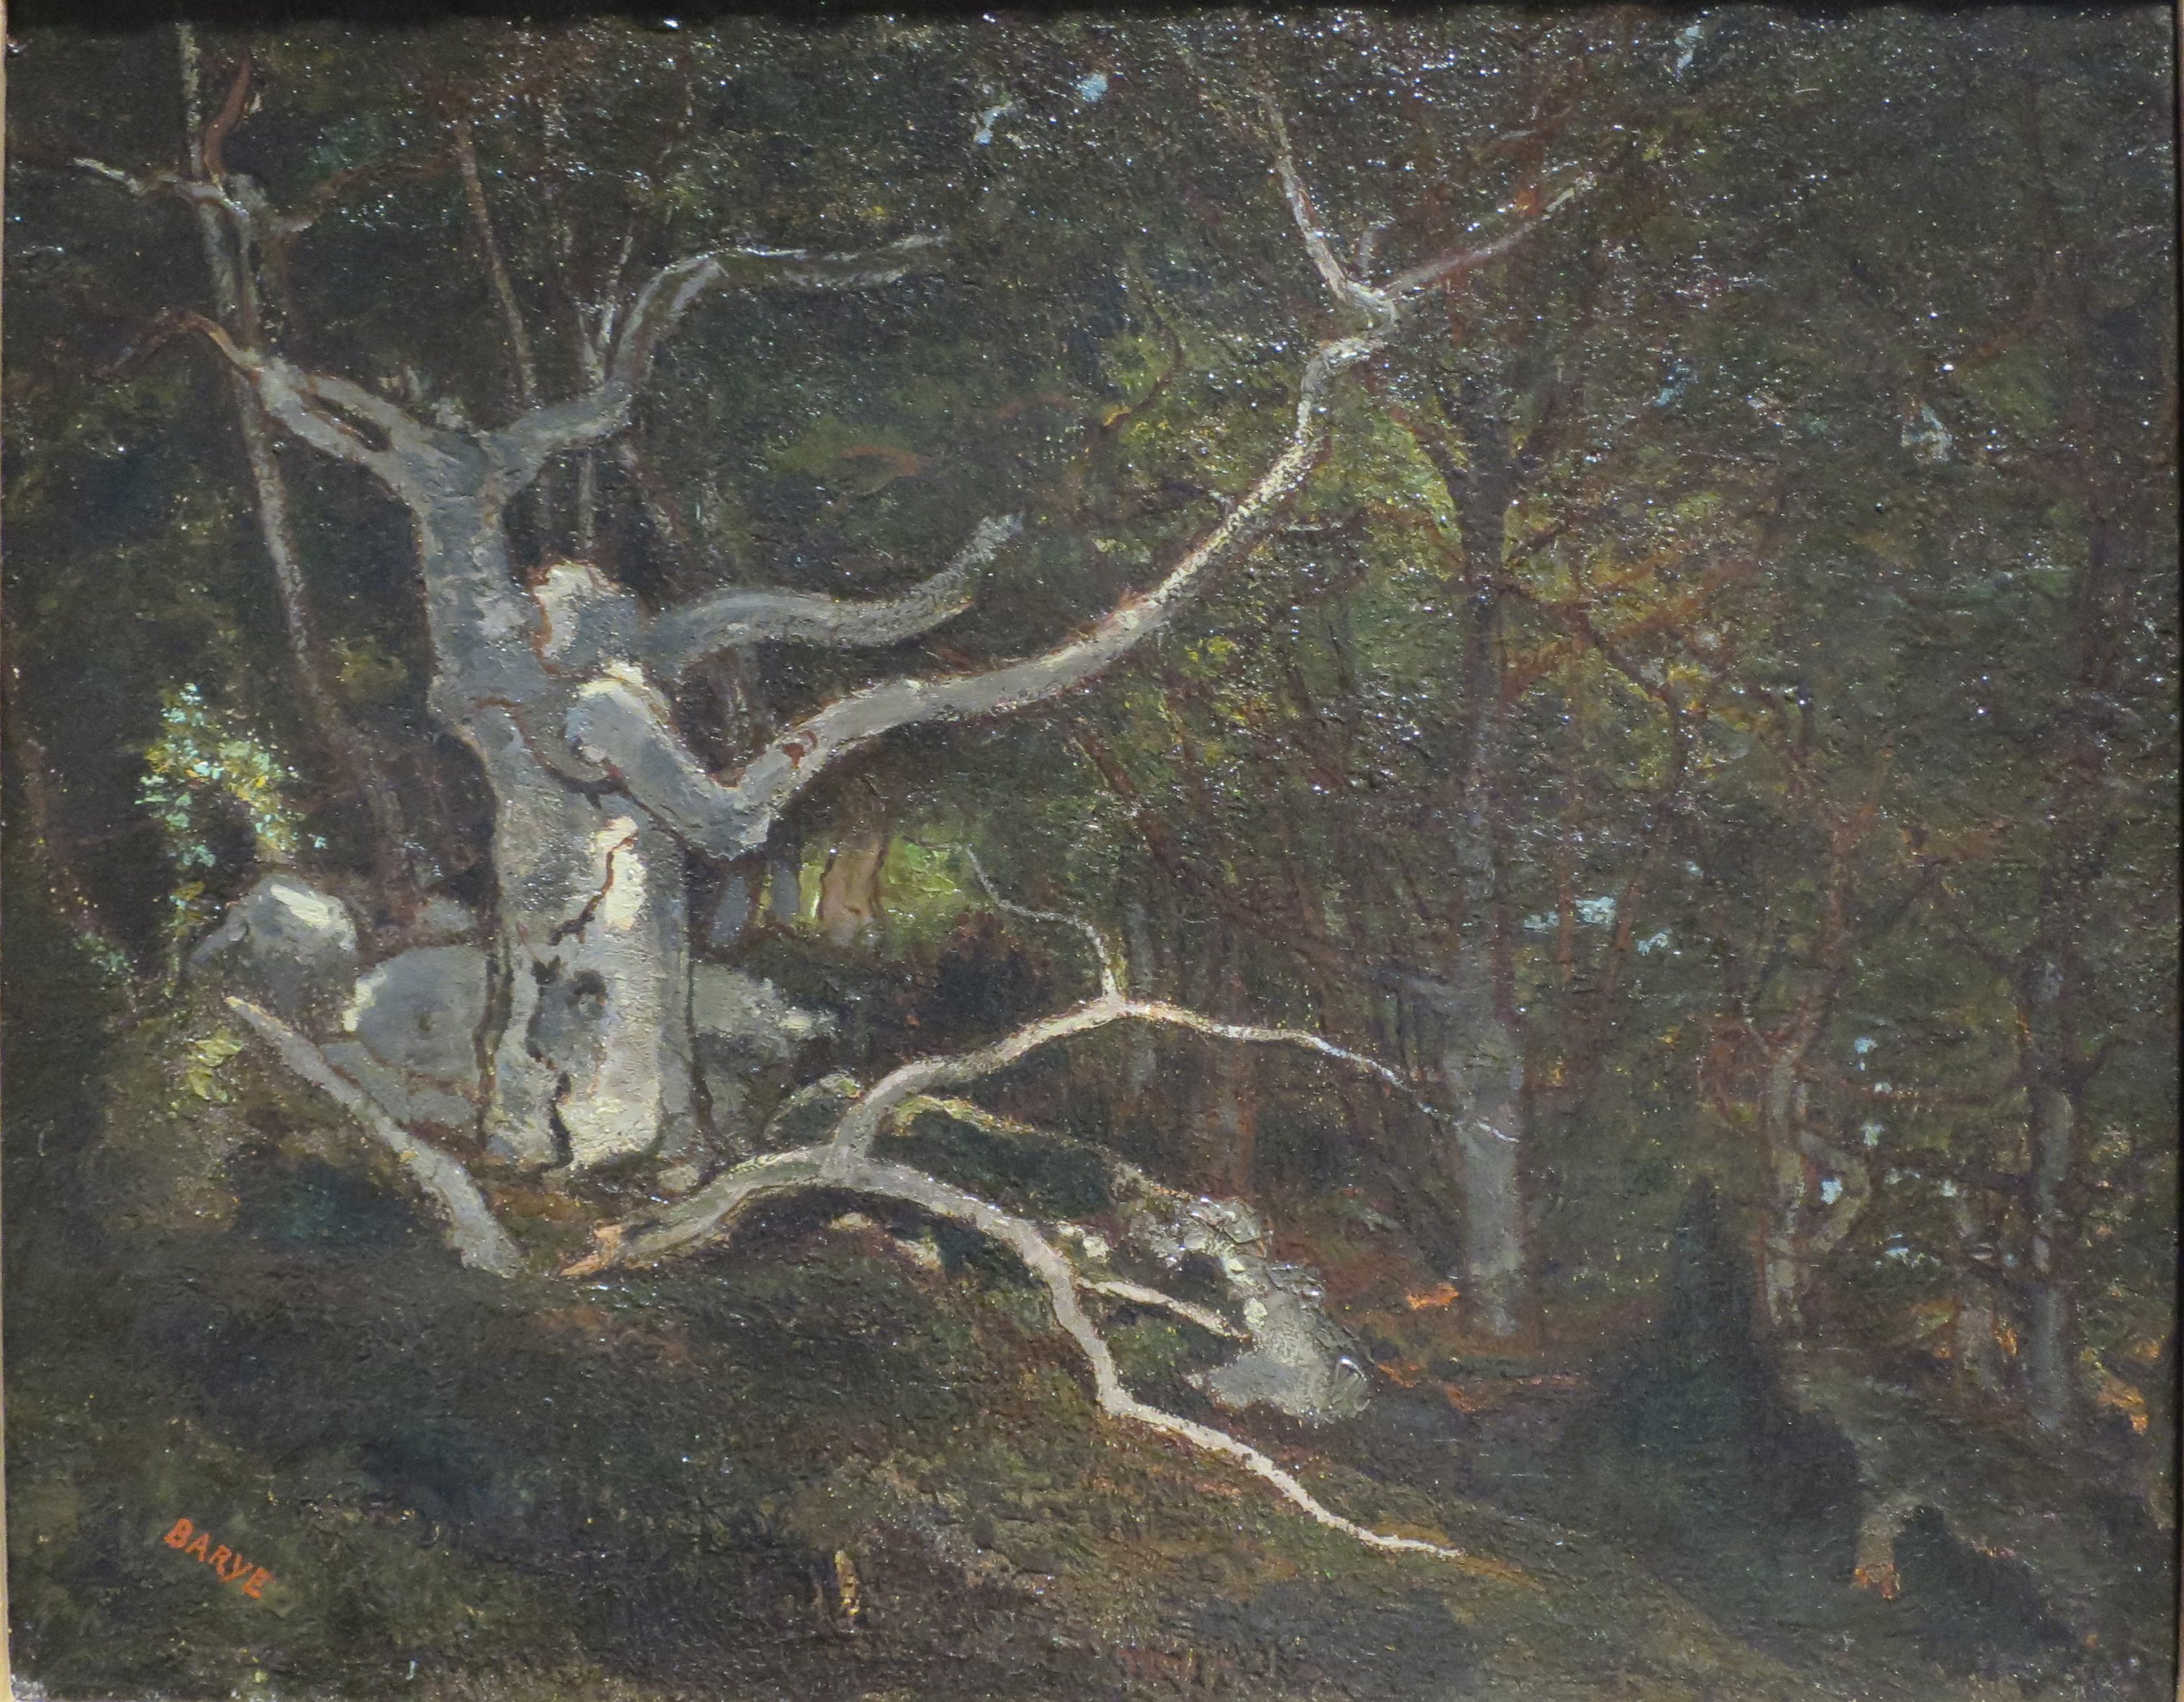 Forest of Fontainebleau, The 'Reine Blanche' by Antoine-Louis Barye, High Museum